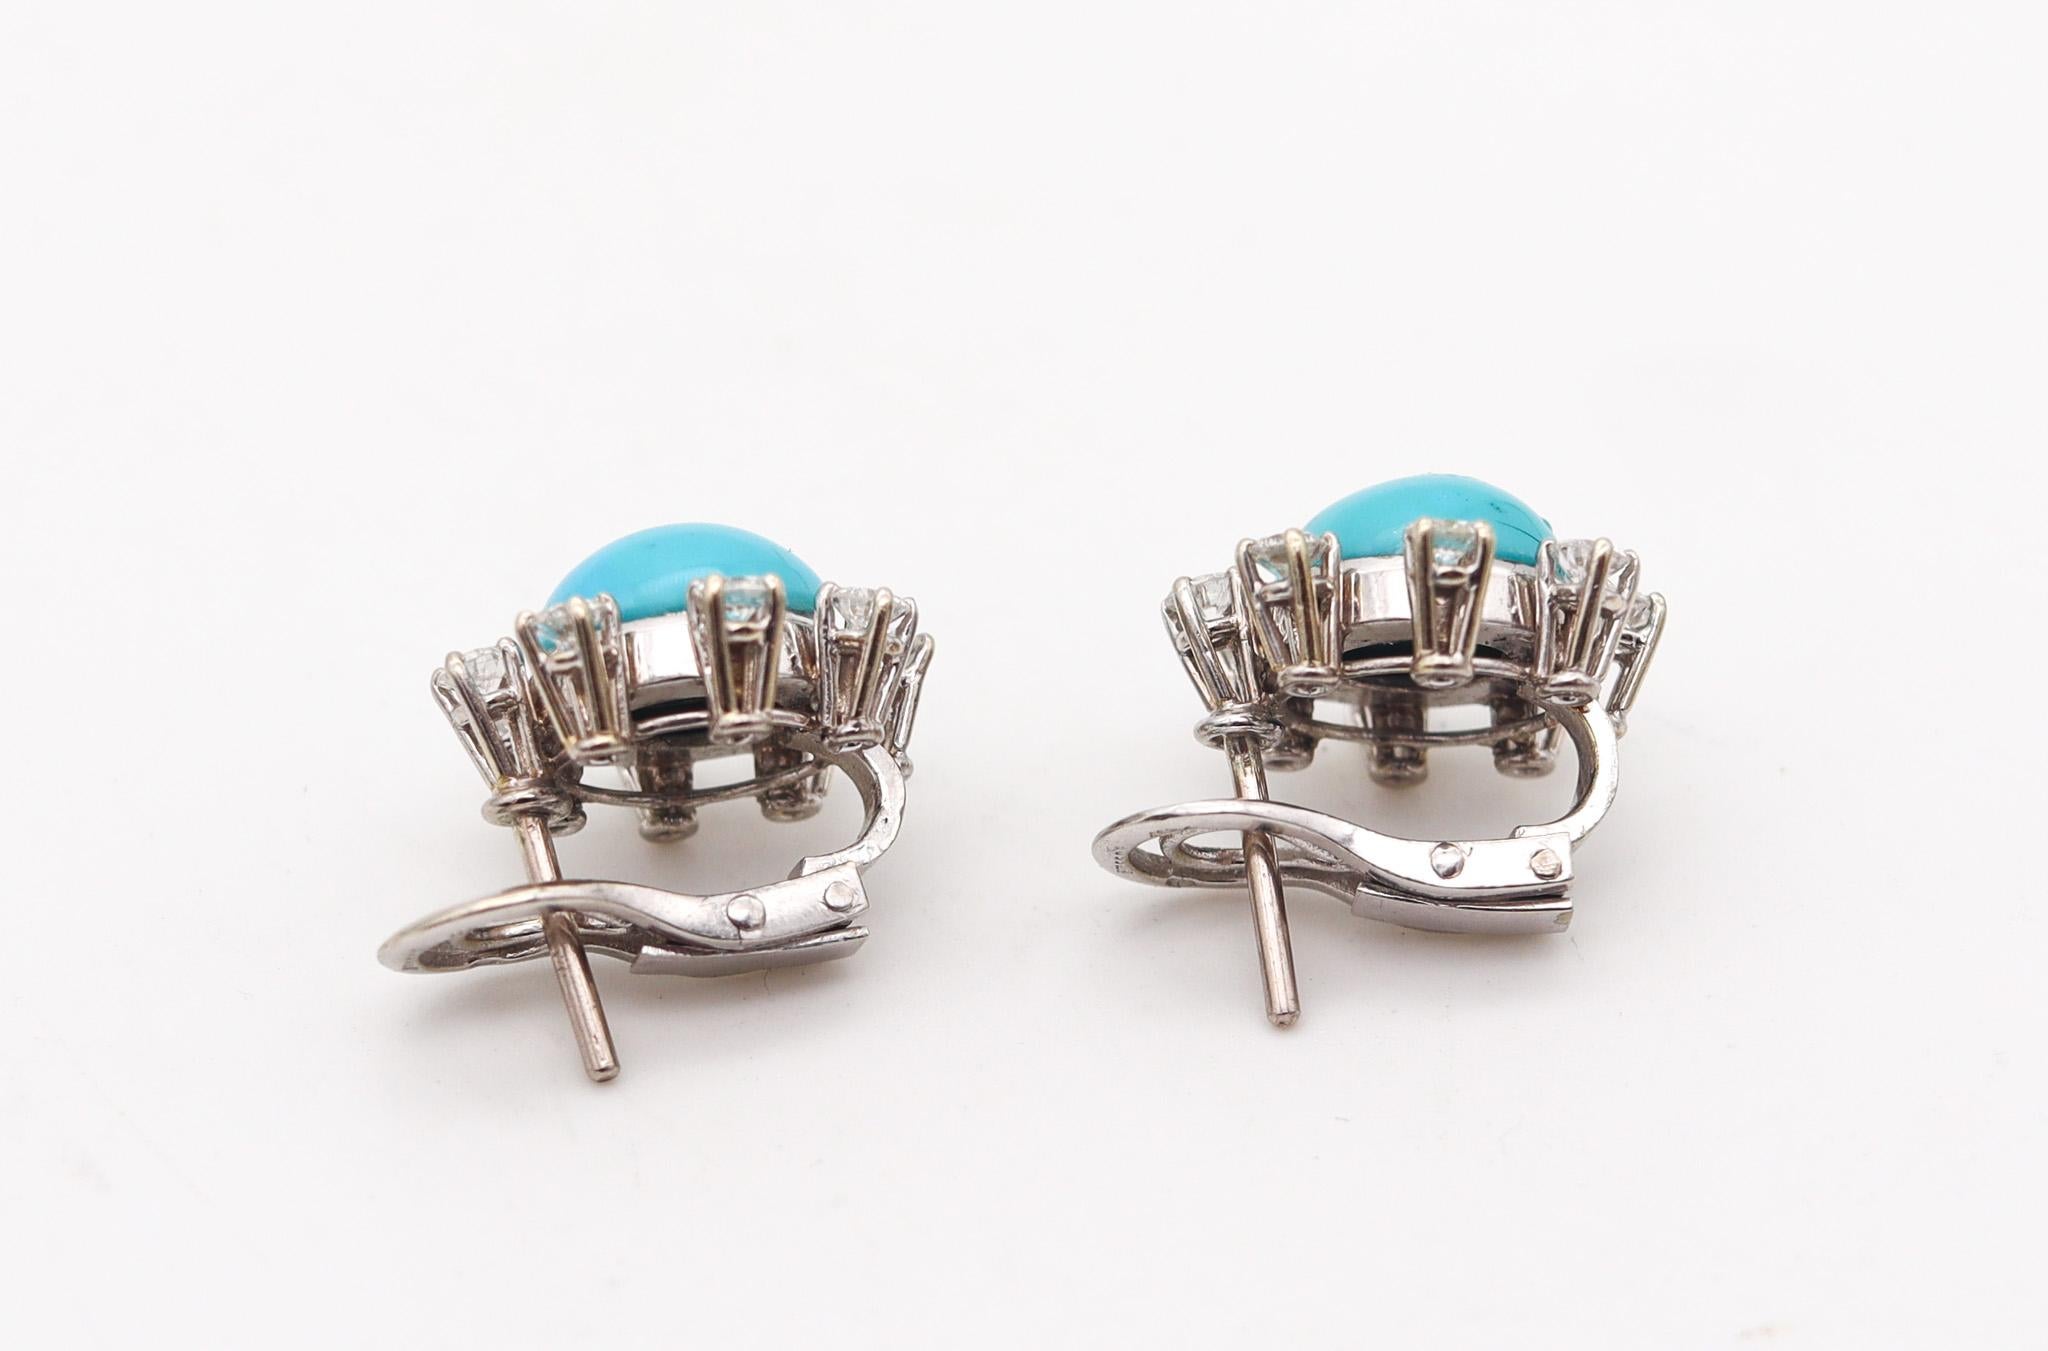 Brilliant Cut French 1960 Modernist Earrings In 18Kt Gold With 12.98 Ctw Diamonds & Turquoises For Sale